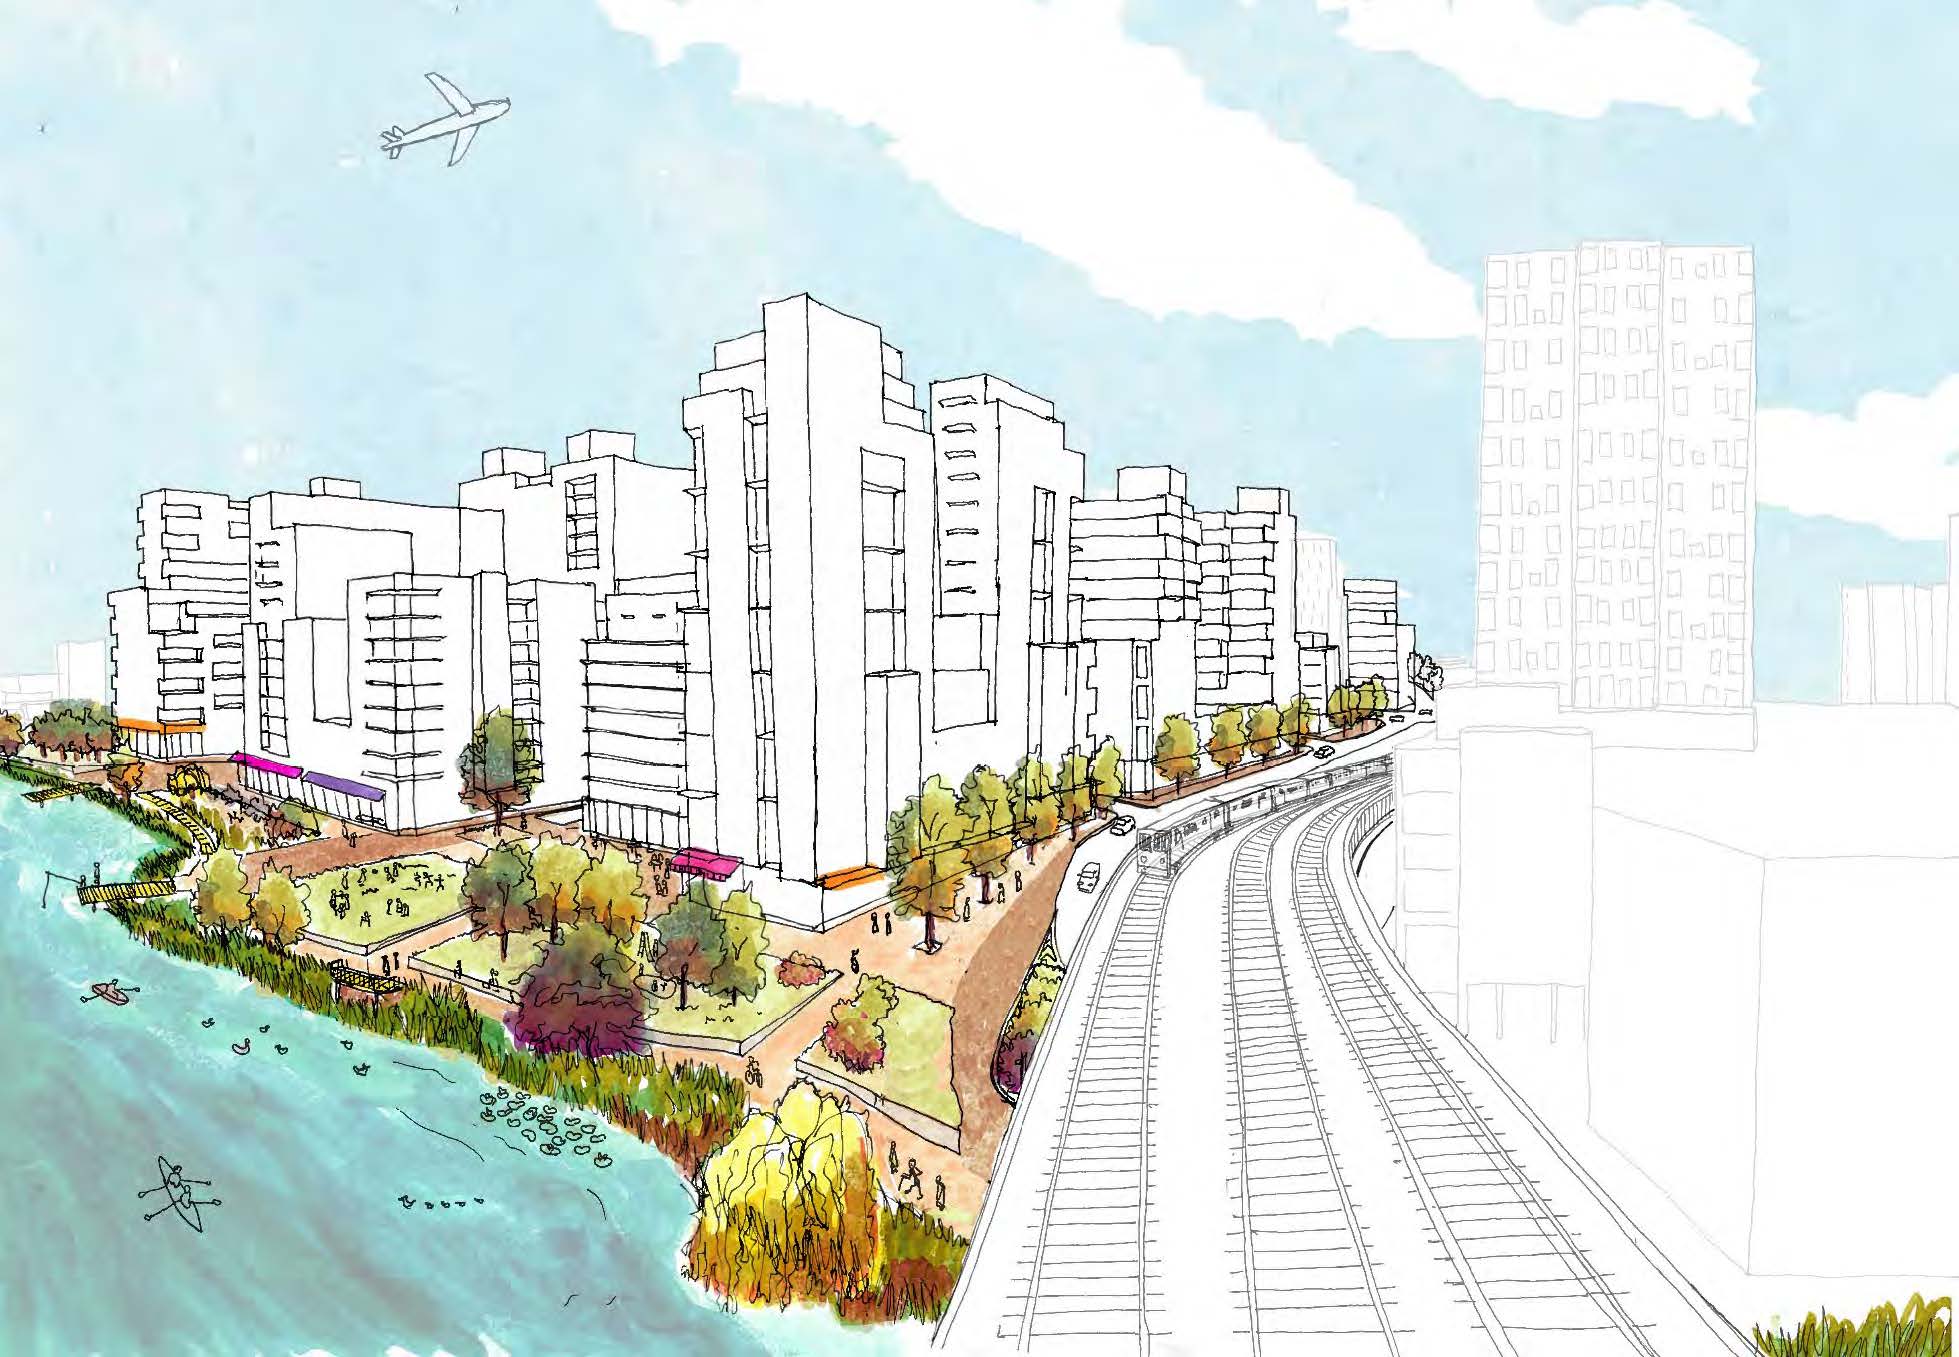 A rendering of the city's vision for Flushing West from the 7 train tracks. image via Department of City Planning